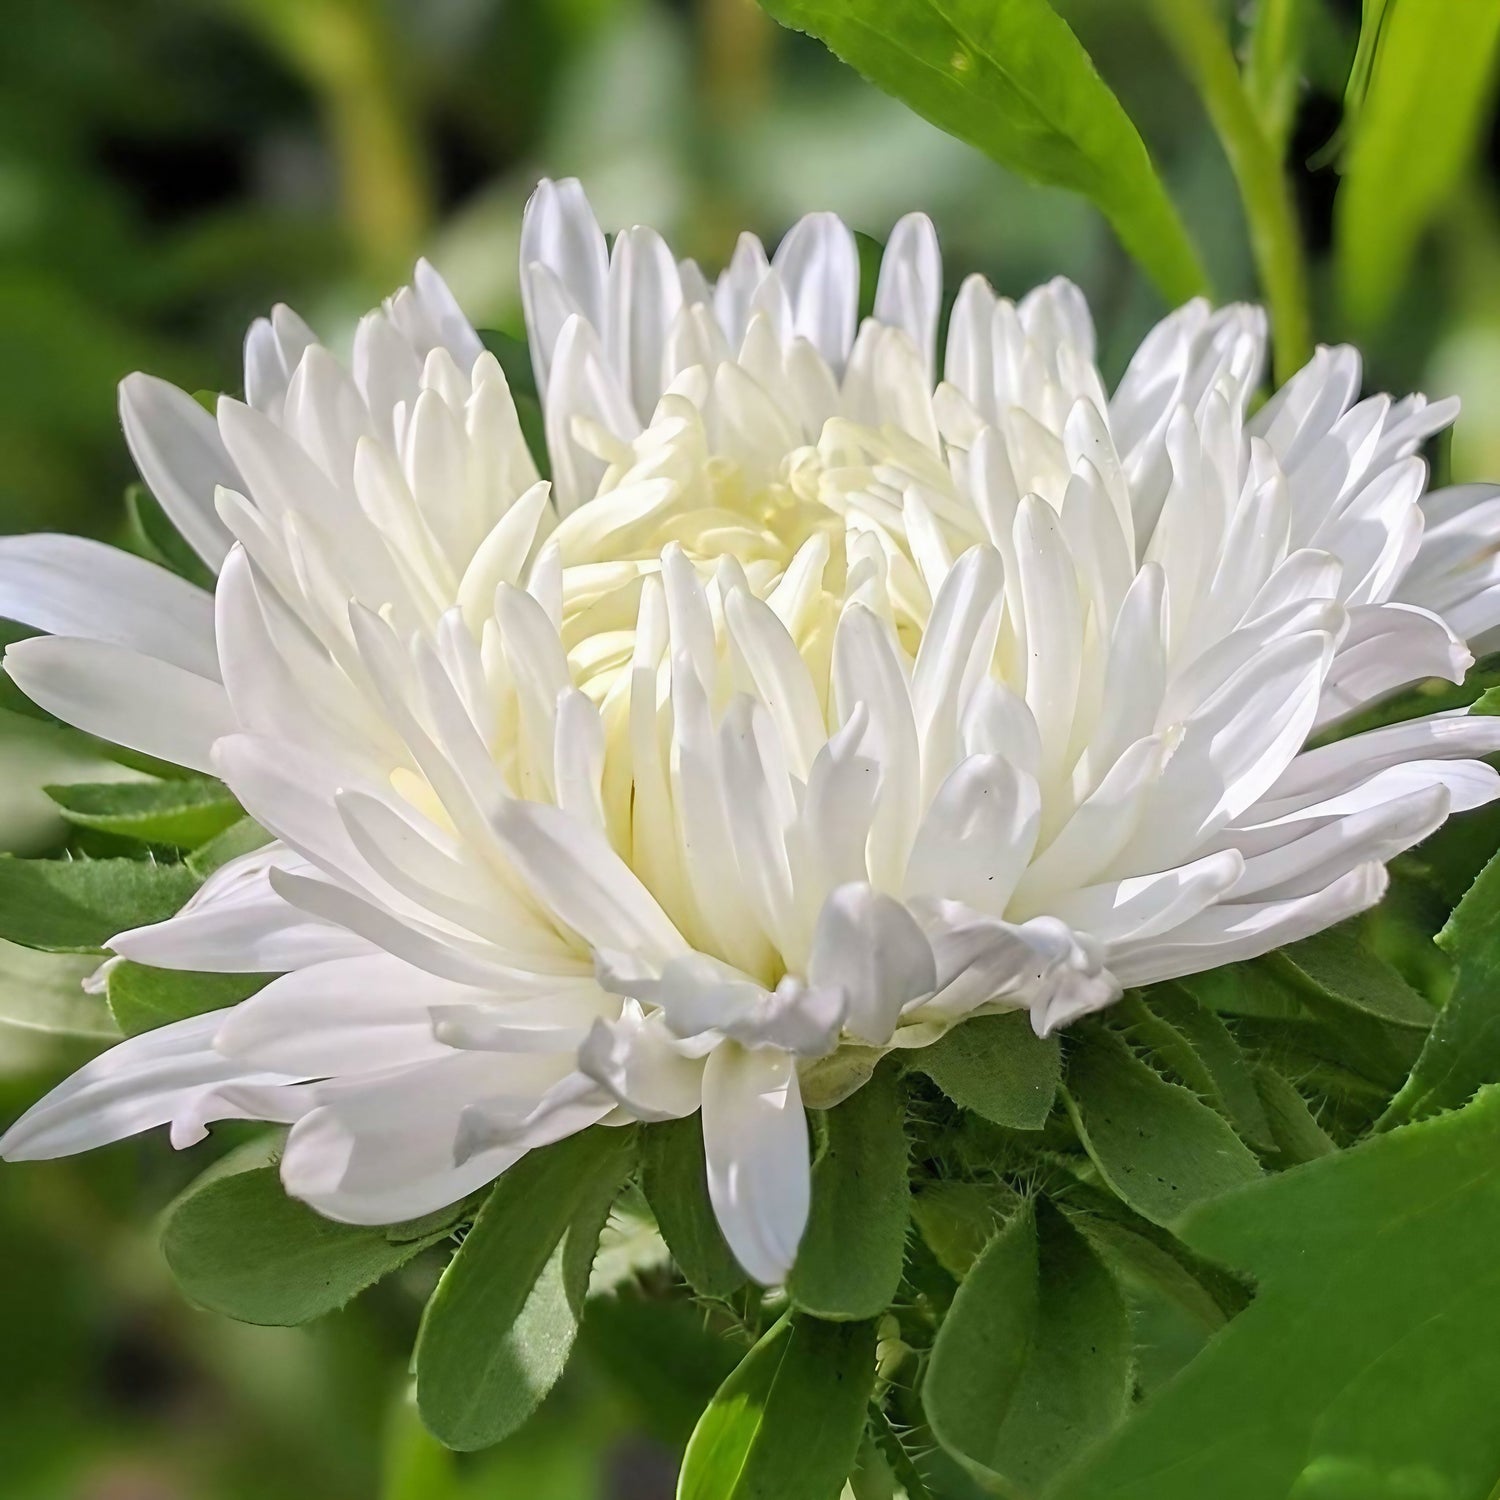 A white Aster Duchess flower blooming amidst green garden leaves